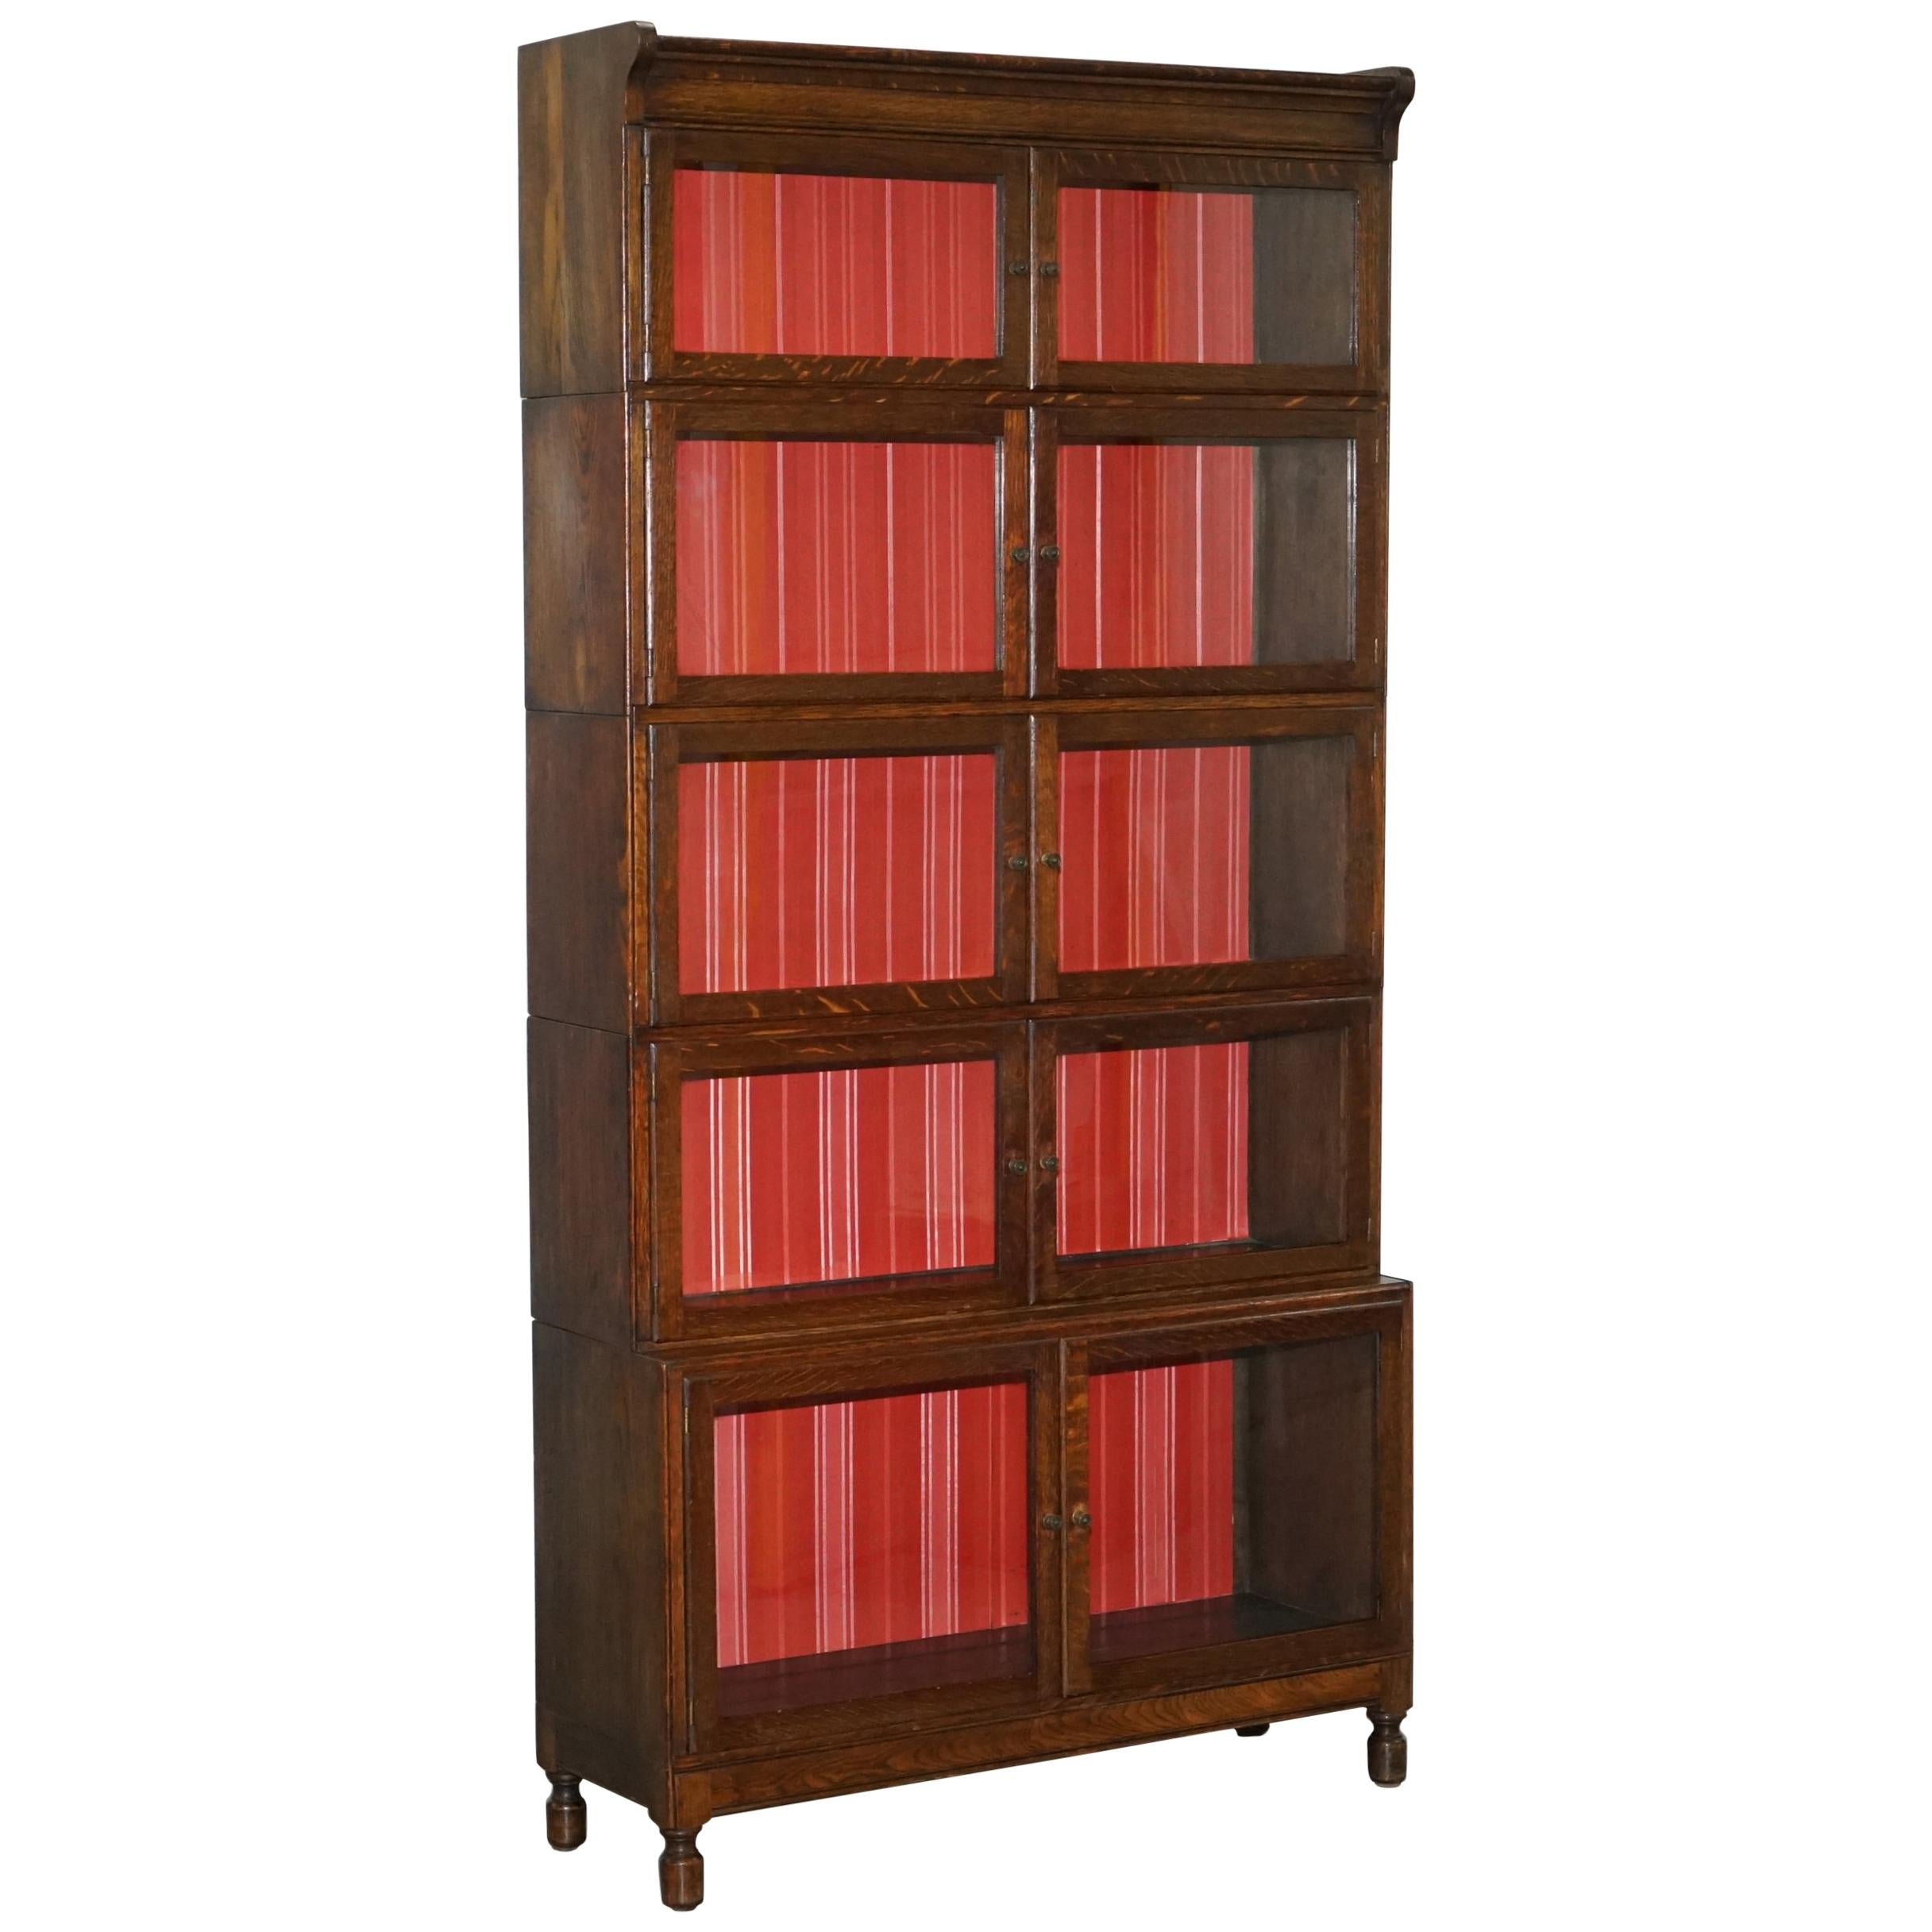 Modular Minty Oxford Five-Piece Antique Stacking Legal Library Bookcase